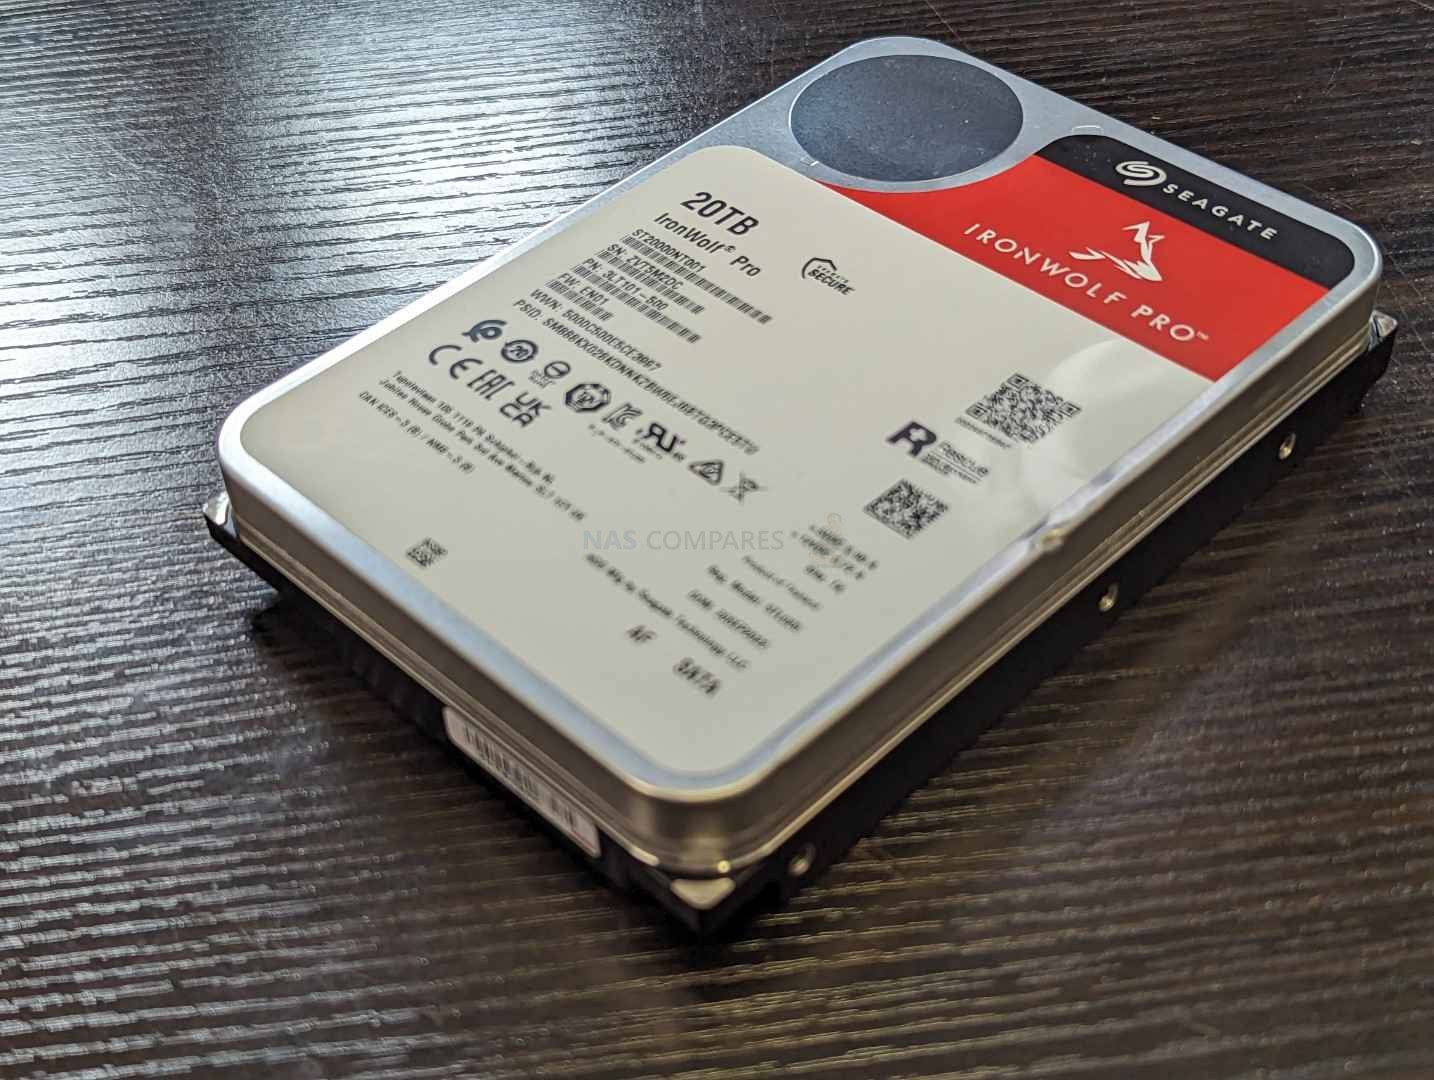 Seagate IronWolf Pro 18TB Review  NAS drive - Hardware - Business IT